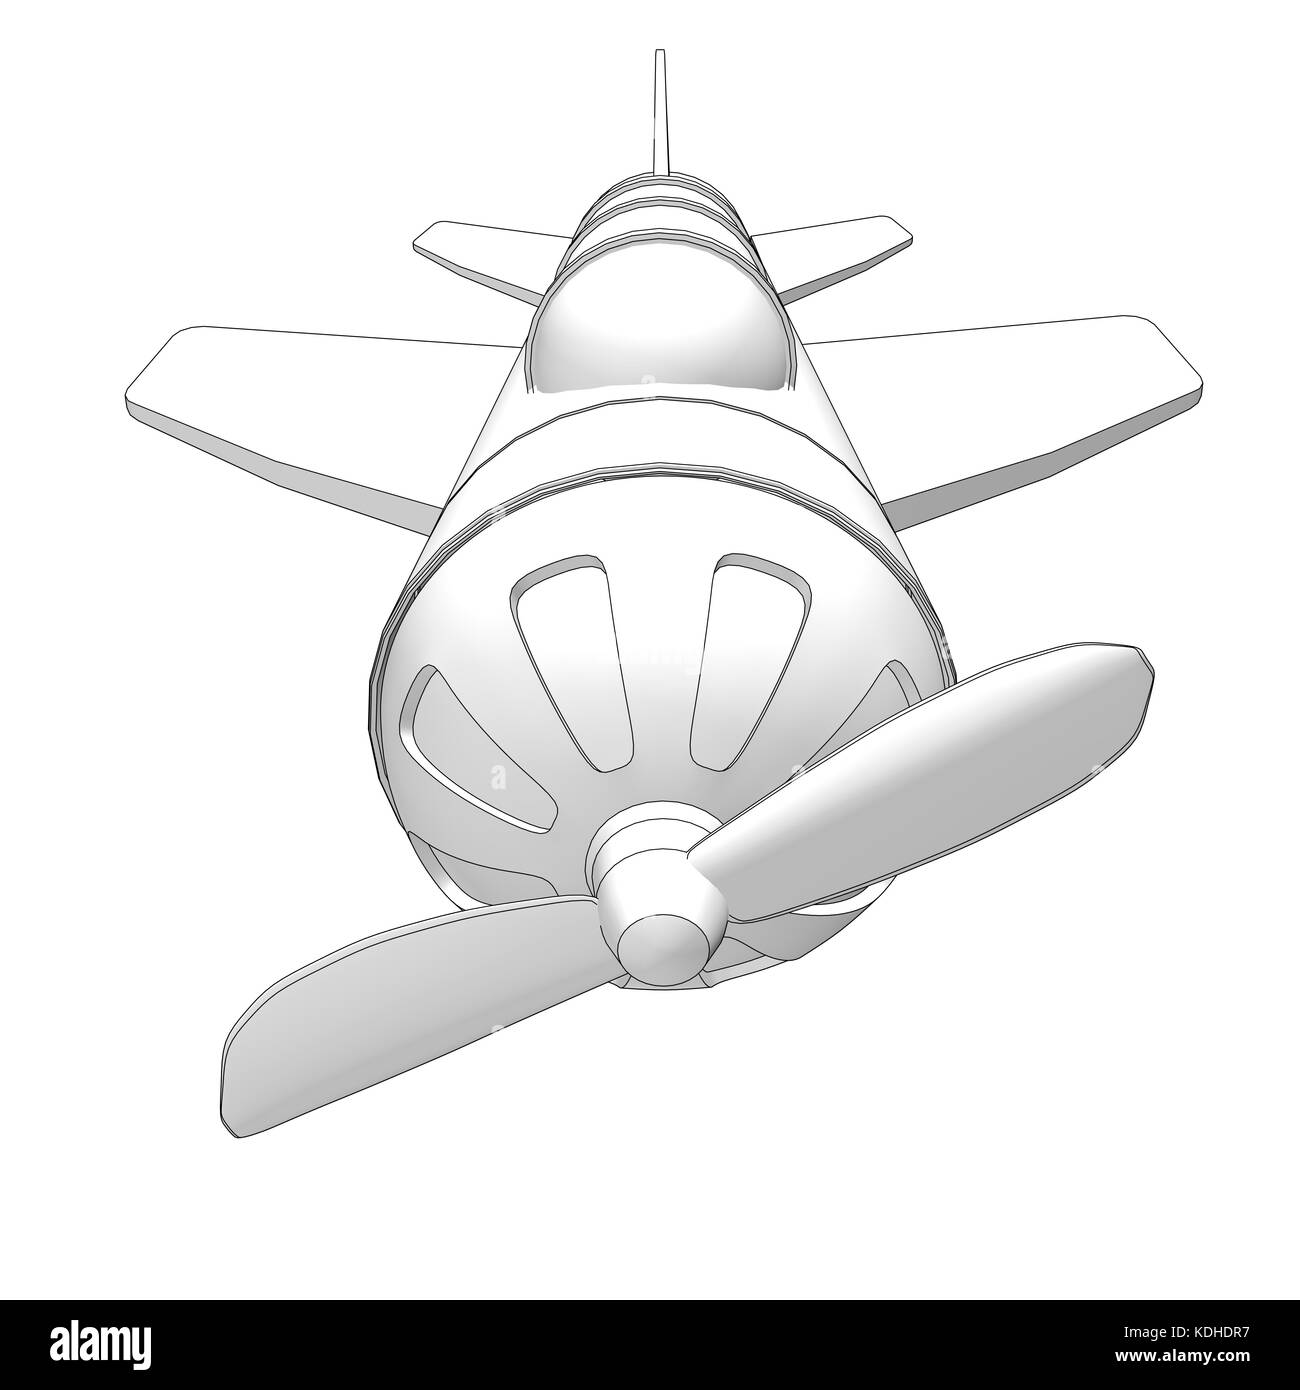 isolated toy airplane with contours in black Stock Photo